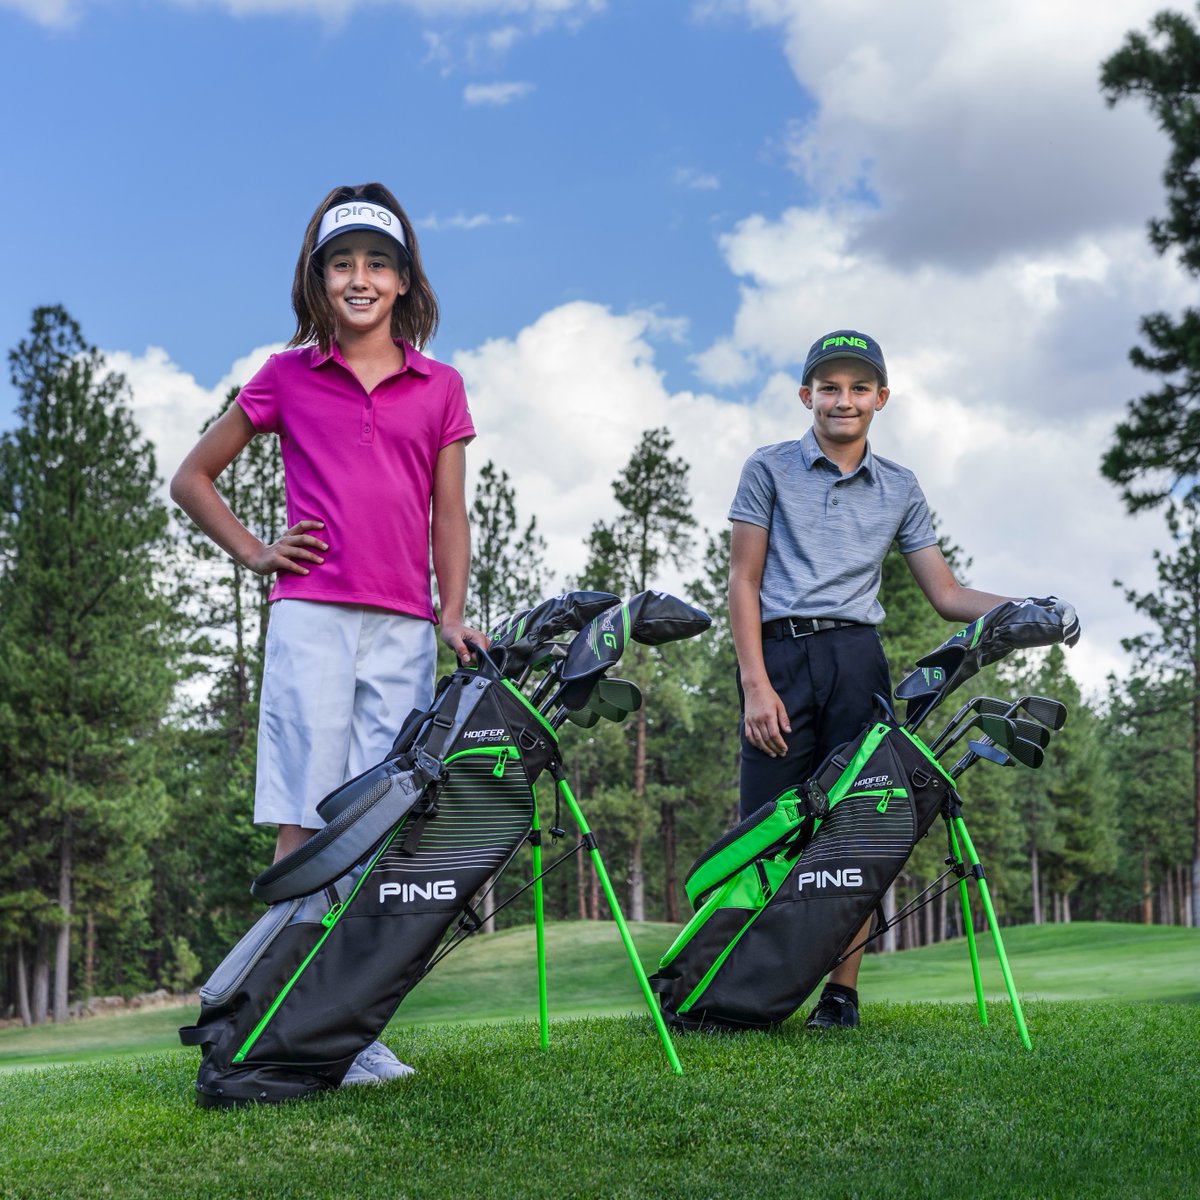 Have you tried #PGAPlay? A brilliant initiative from @ThePGA, it provides easy access to golf lessons with a trusted, local PGA Pro.

Whether you're introducing a junior to the game, or honing your skills in order to #PlayYourBest, be sure to check it out: pgaplay.co.uk